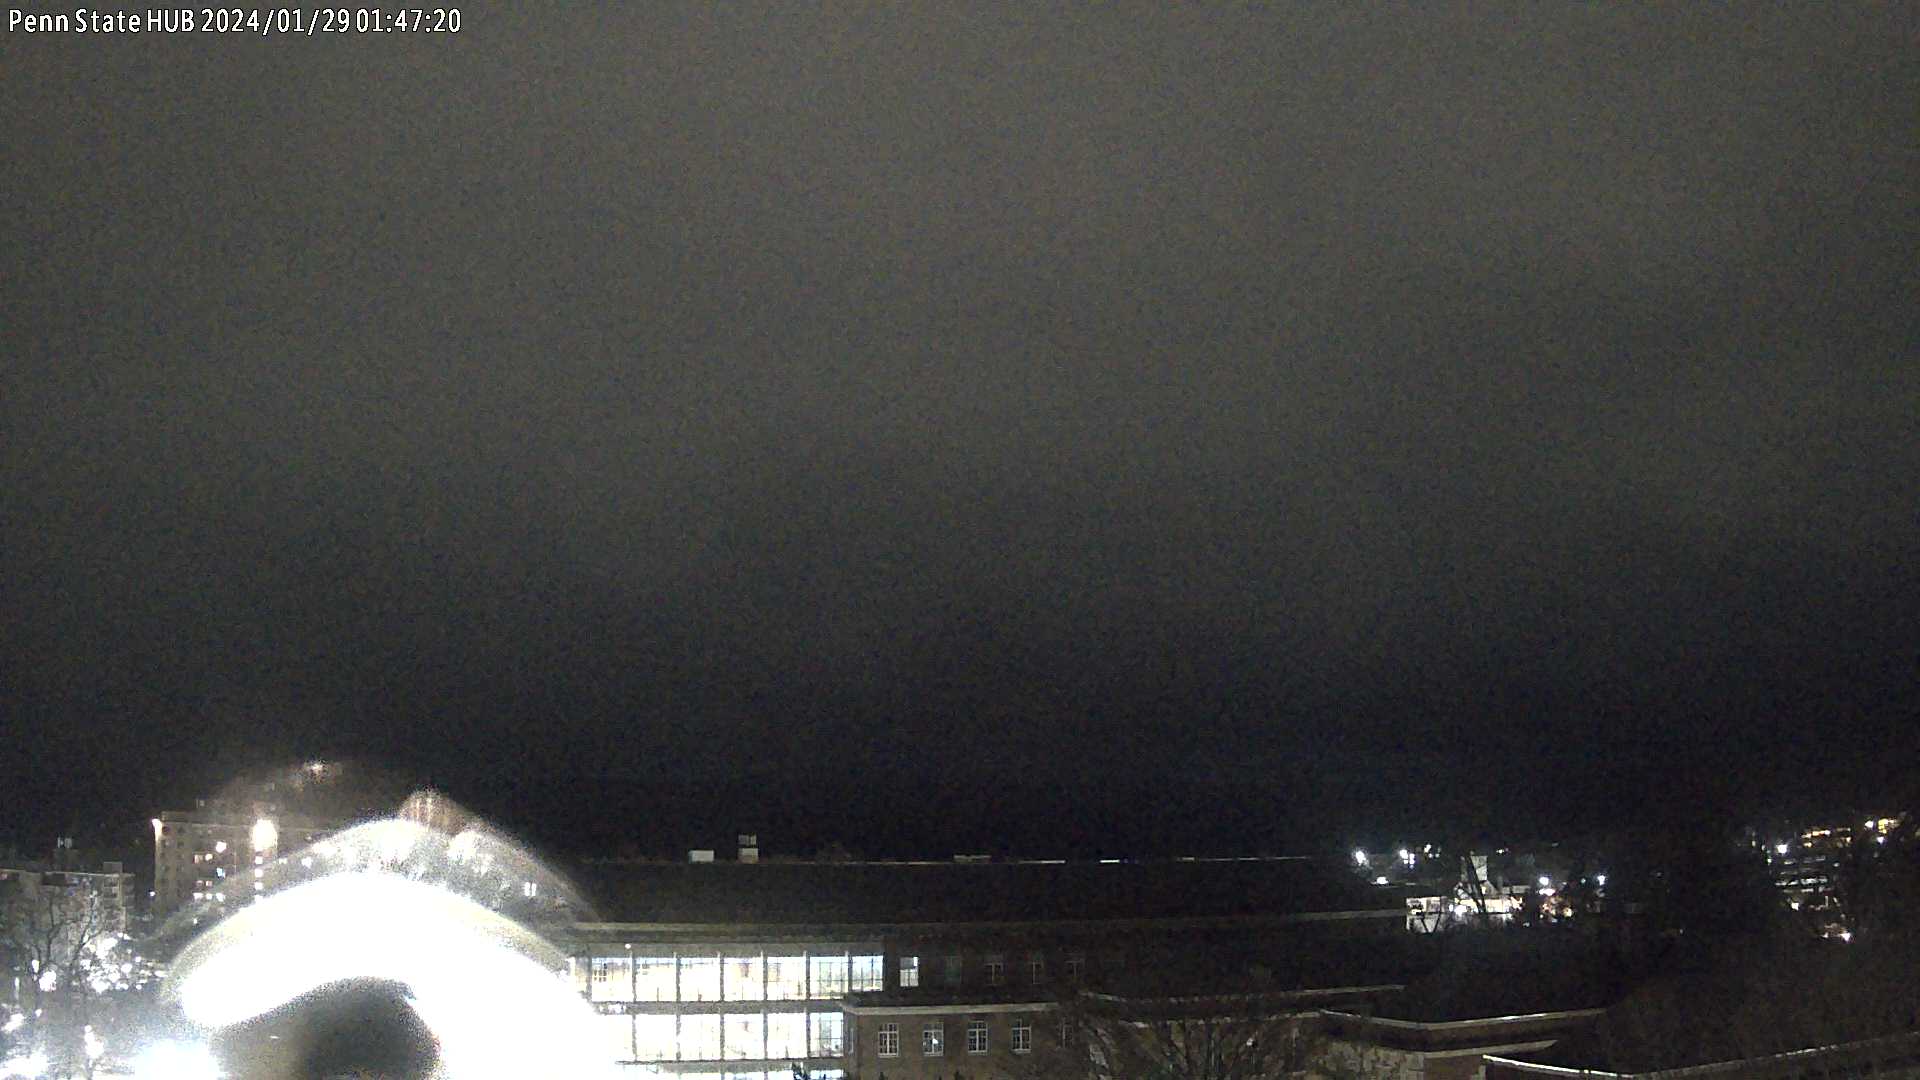 LIVE: WeatherSTEM View From The HUB Camera HUBWeatherSTEM in Centre County, Pennsylvania PA at Penn State HUB